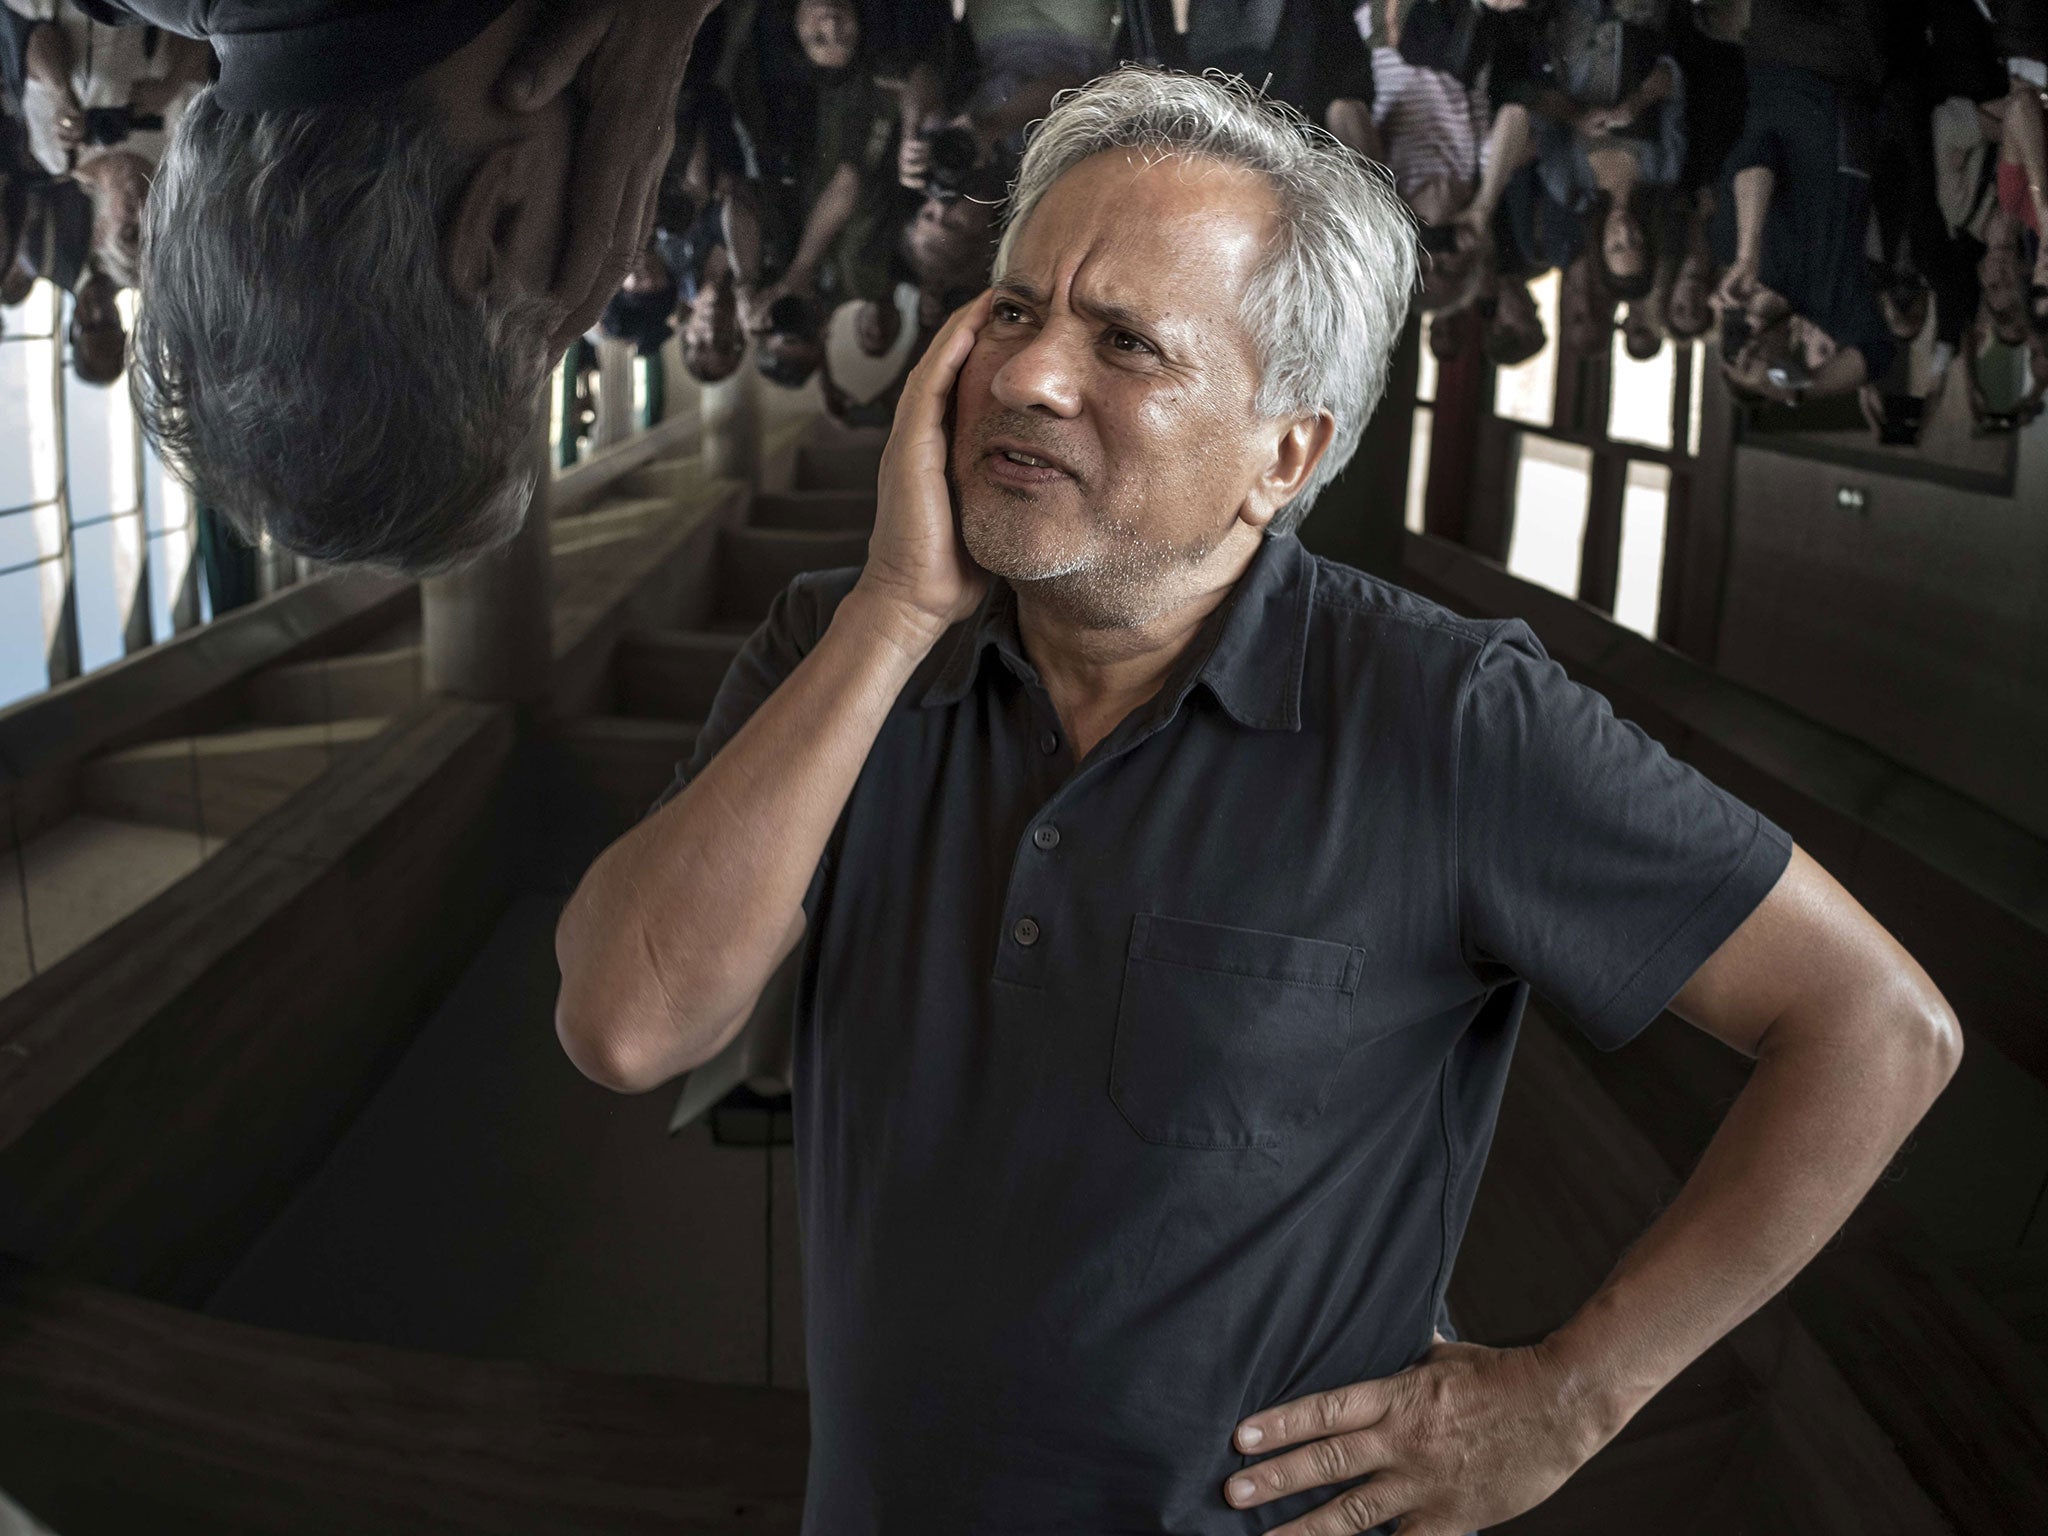 Anish Kapoor was granted exclusive rights to the 'blackest black' in 2014